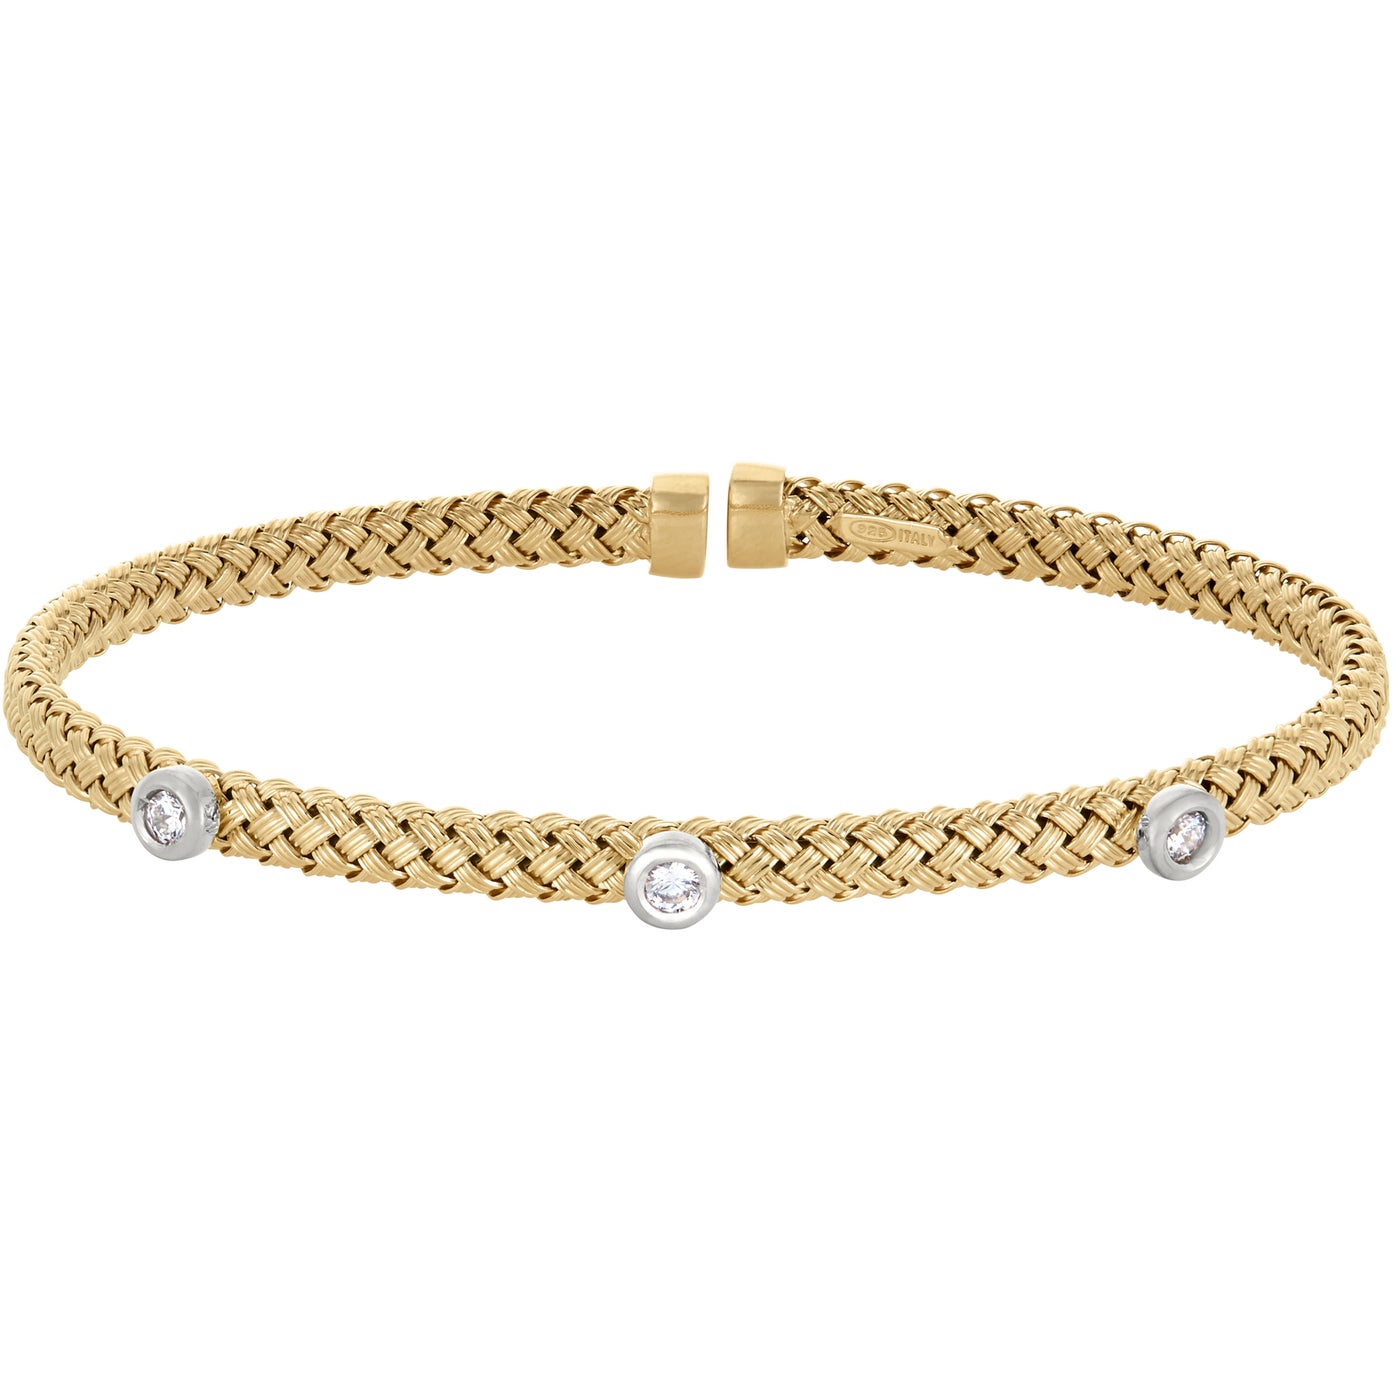 A basketweave sterling silver bracelet with triple simulated diamonds displayed on a neutral white background.